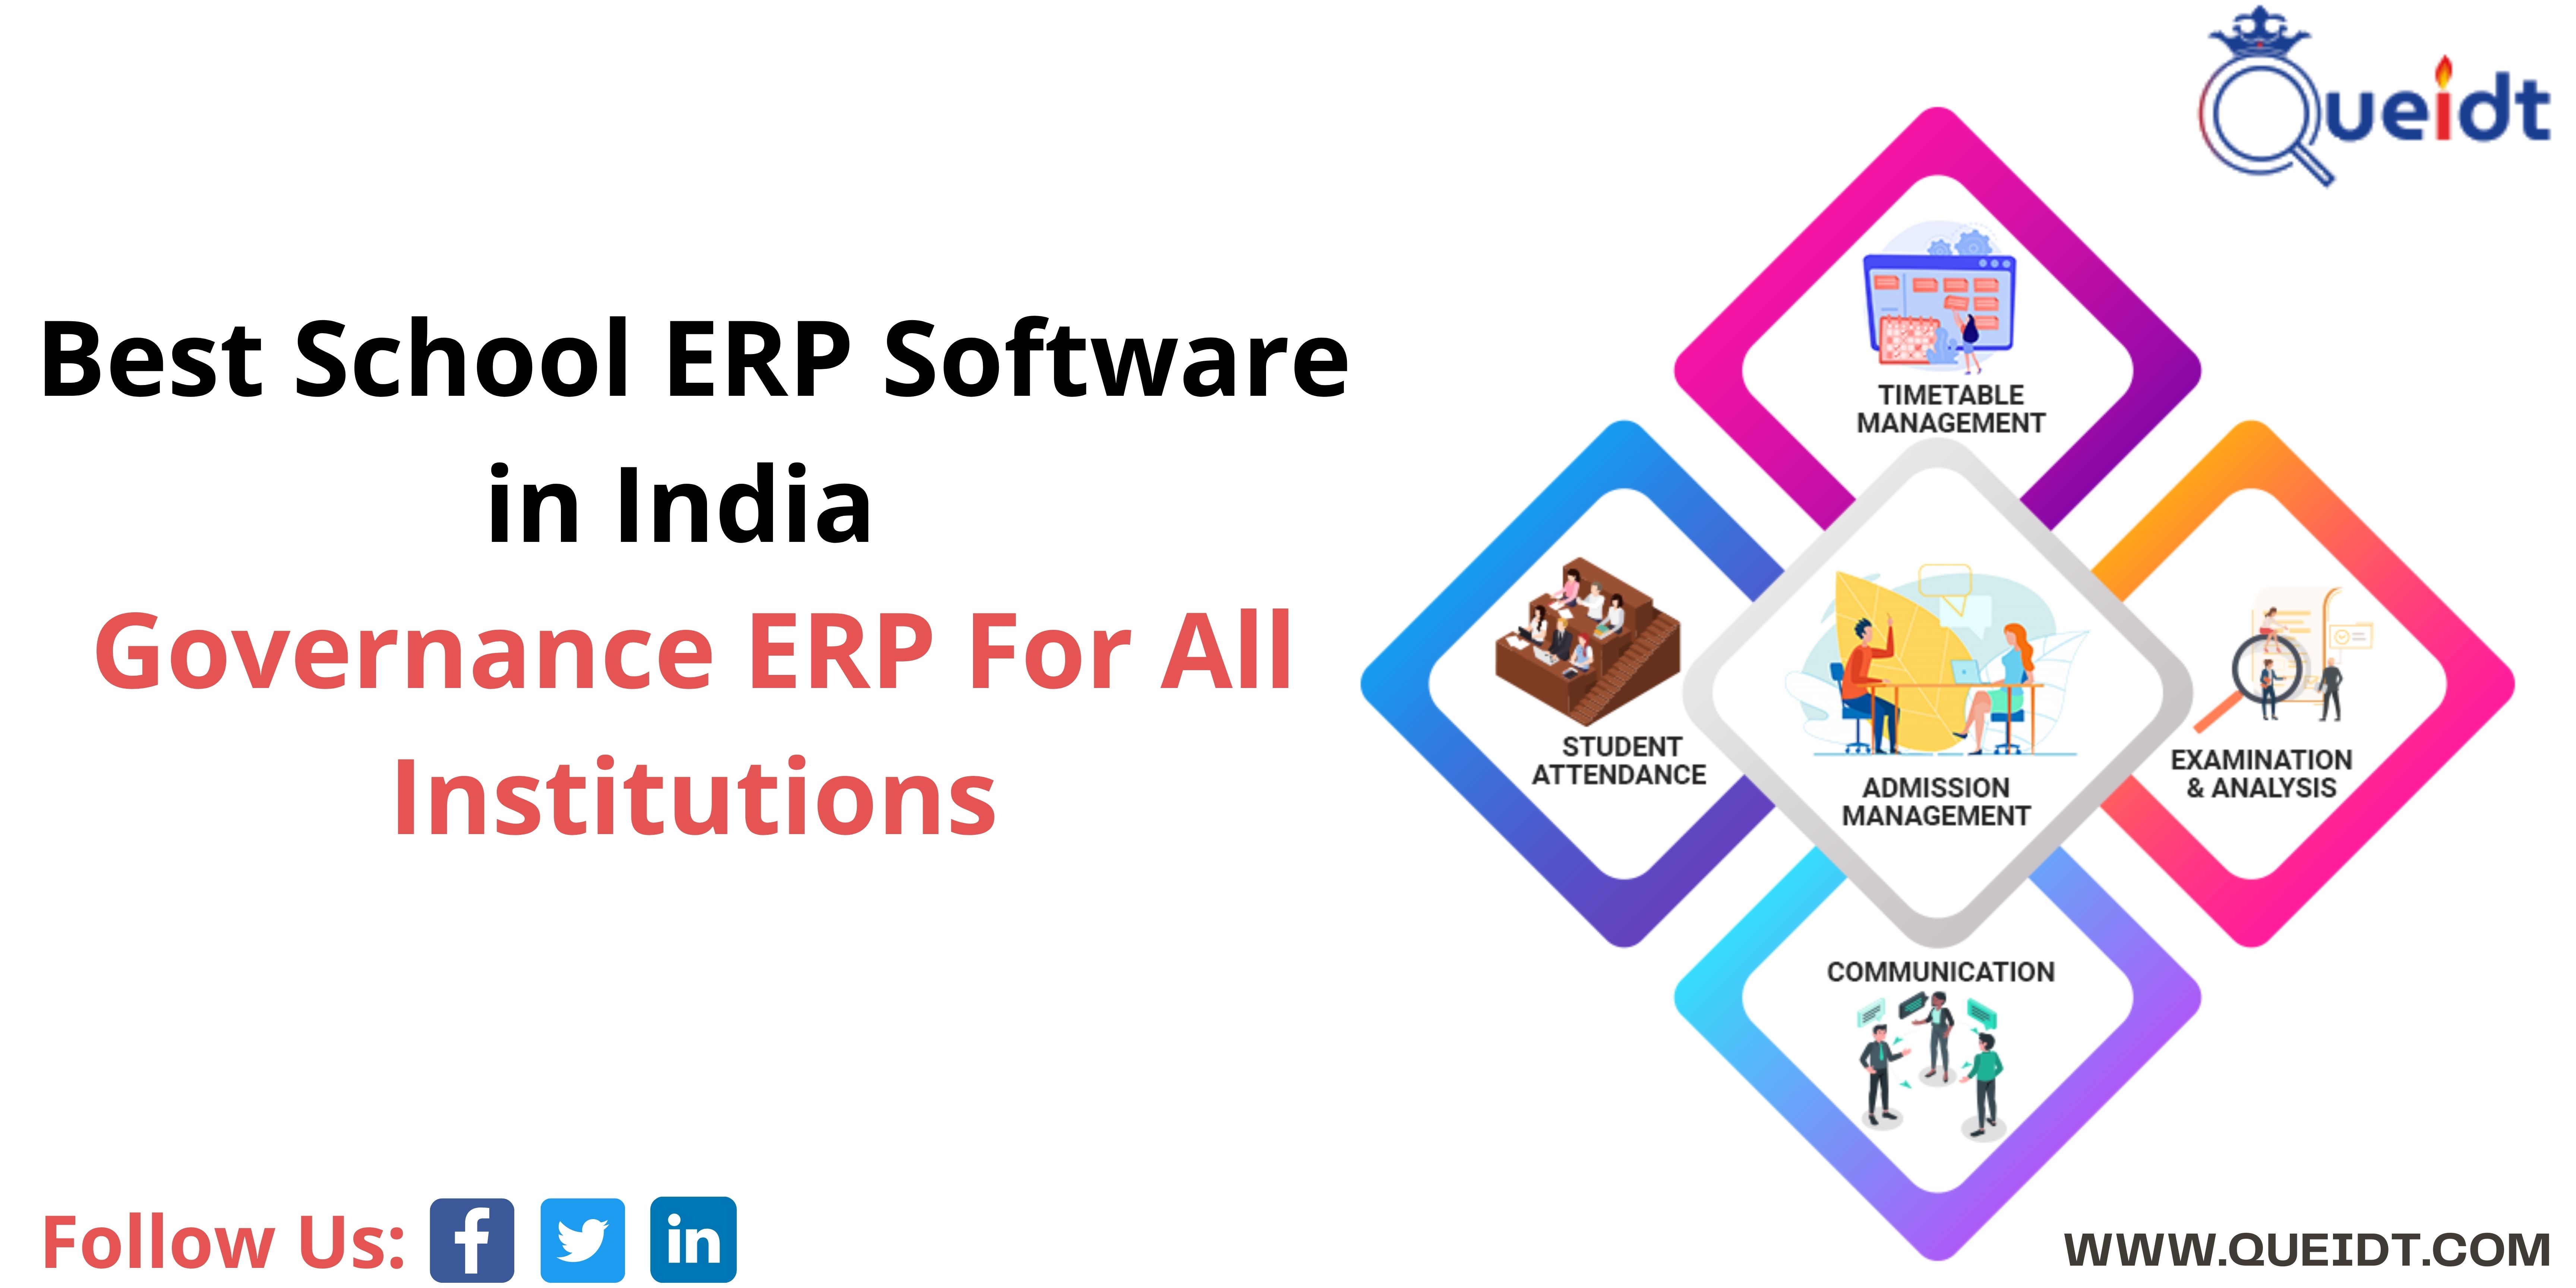 Best School ERP Software in India: Governance ERP For All The Institutions